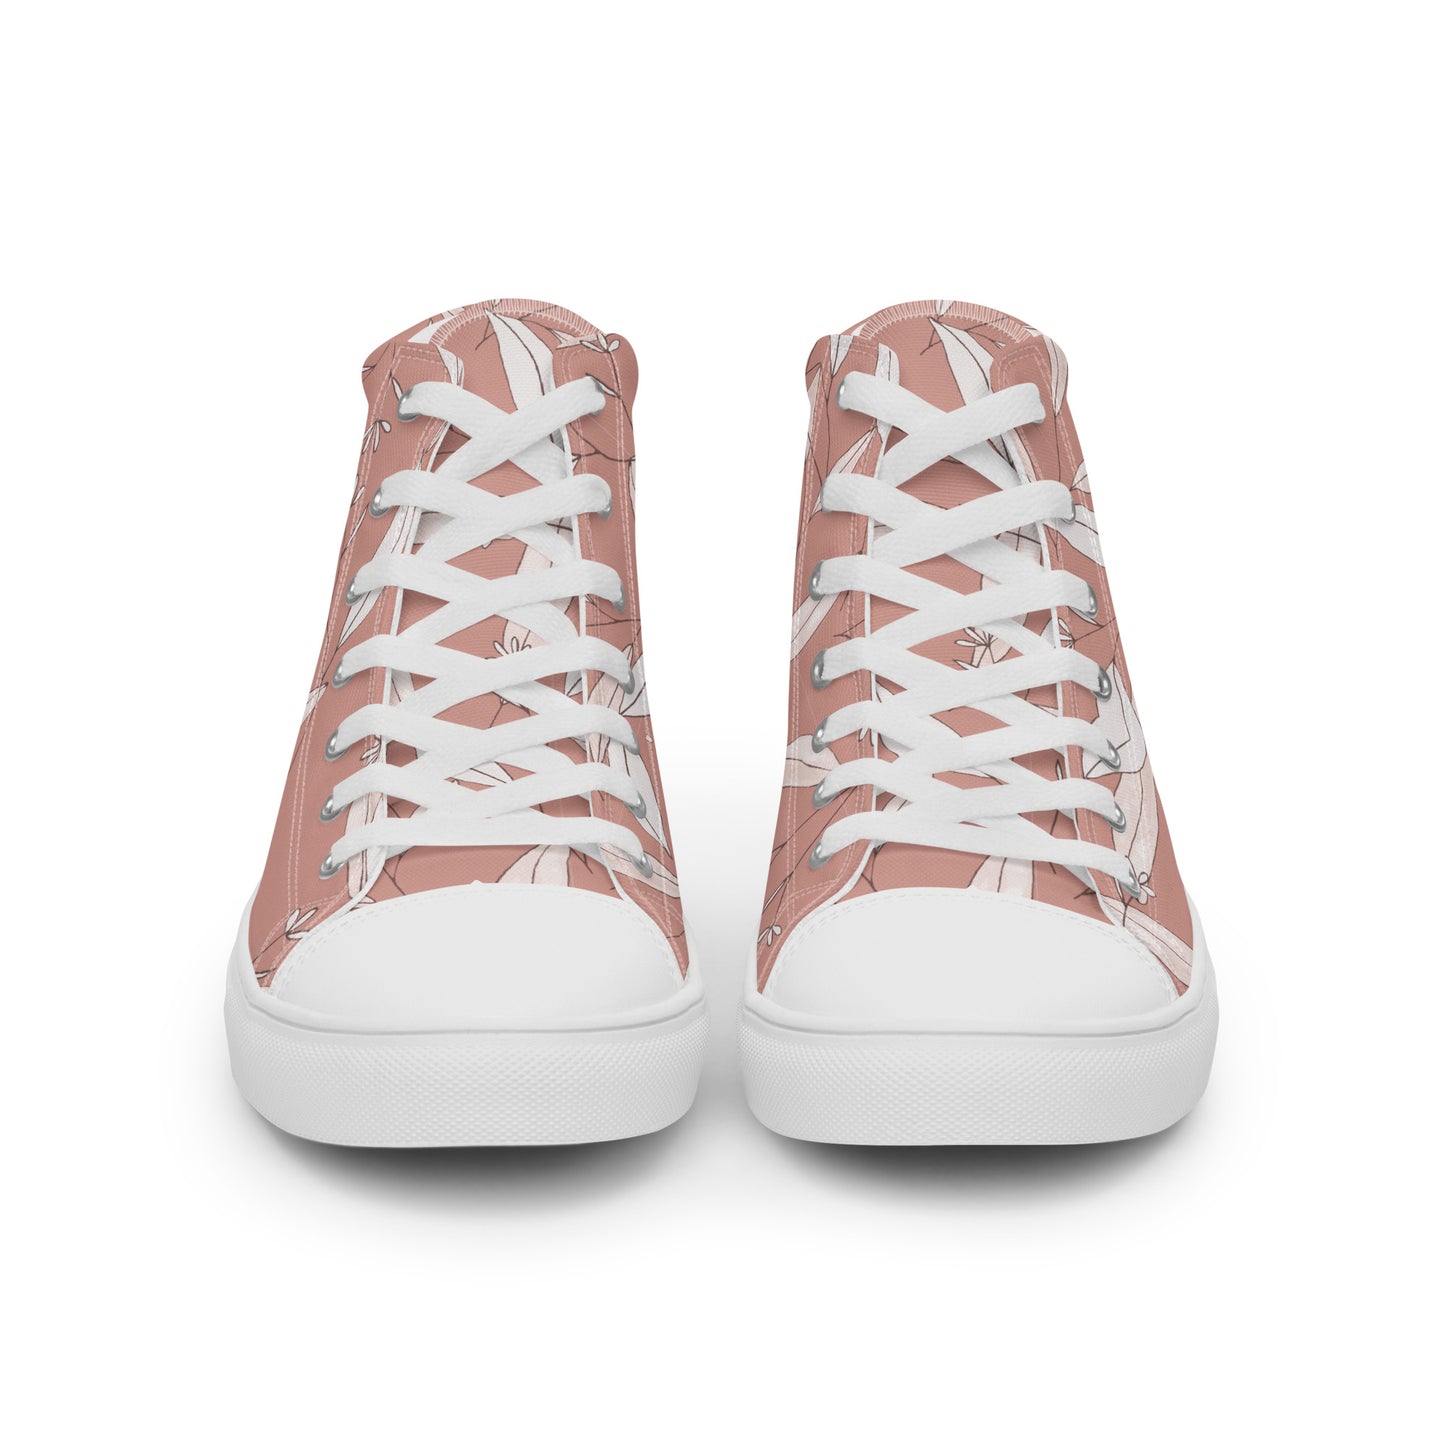 Feathered Finesse Women's High Top Canvas Shoes